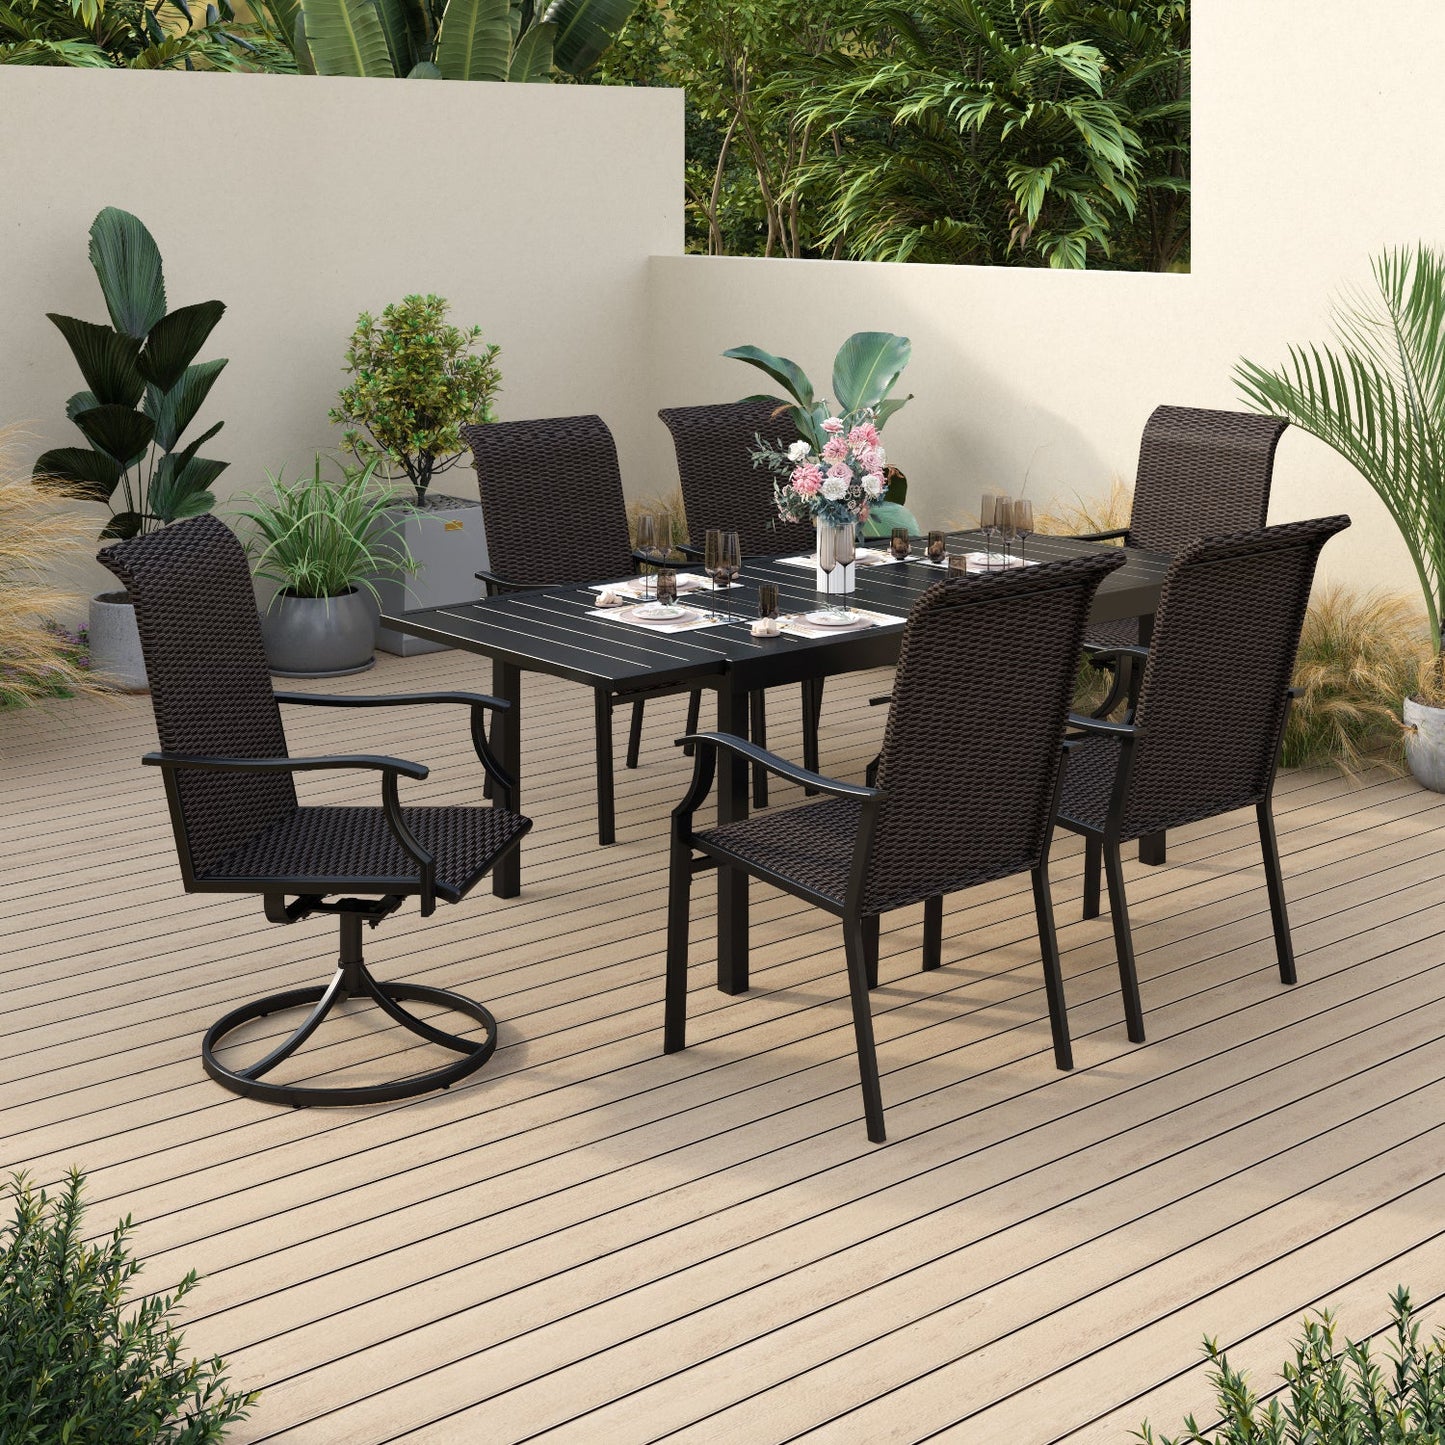 Sophia & William 7 Piece Patio Dining Set 1 Piece Metal Rectangle Table & 6 Pieces Outdoor Patio Chairs